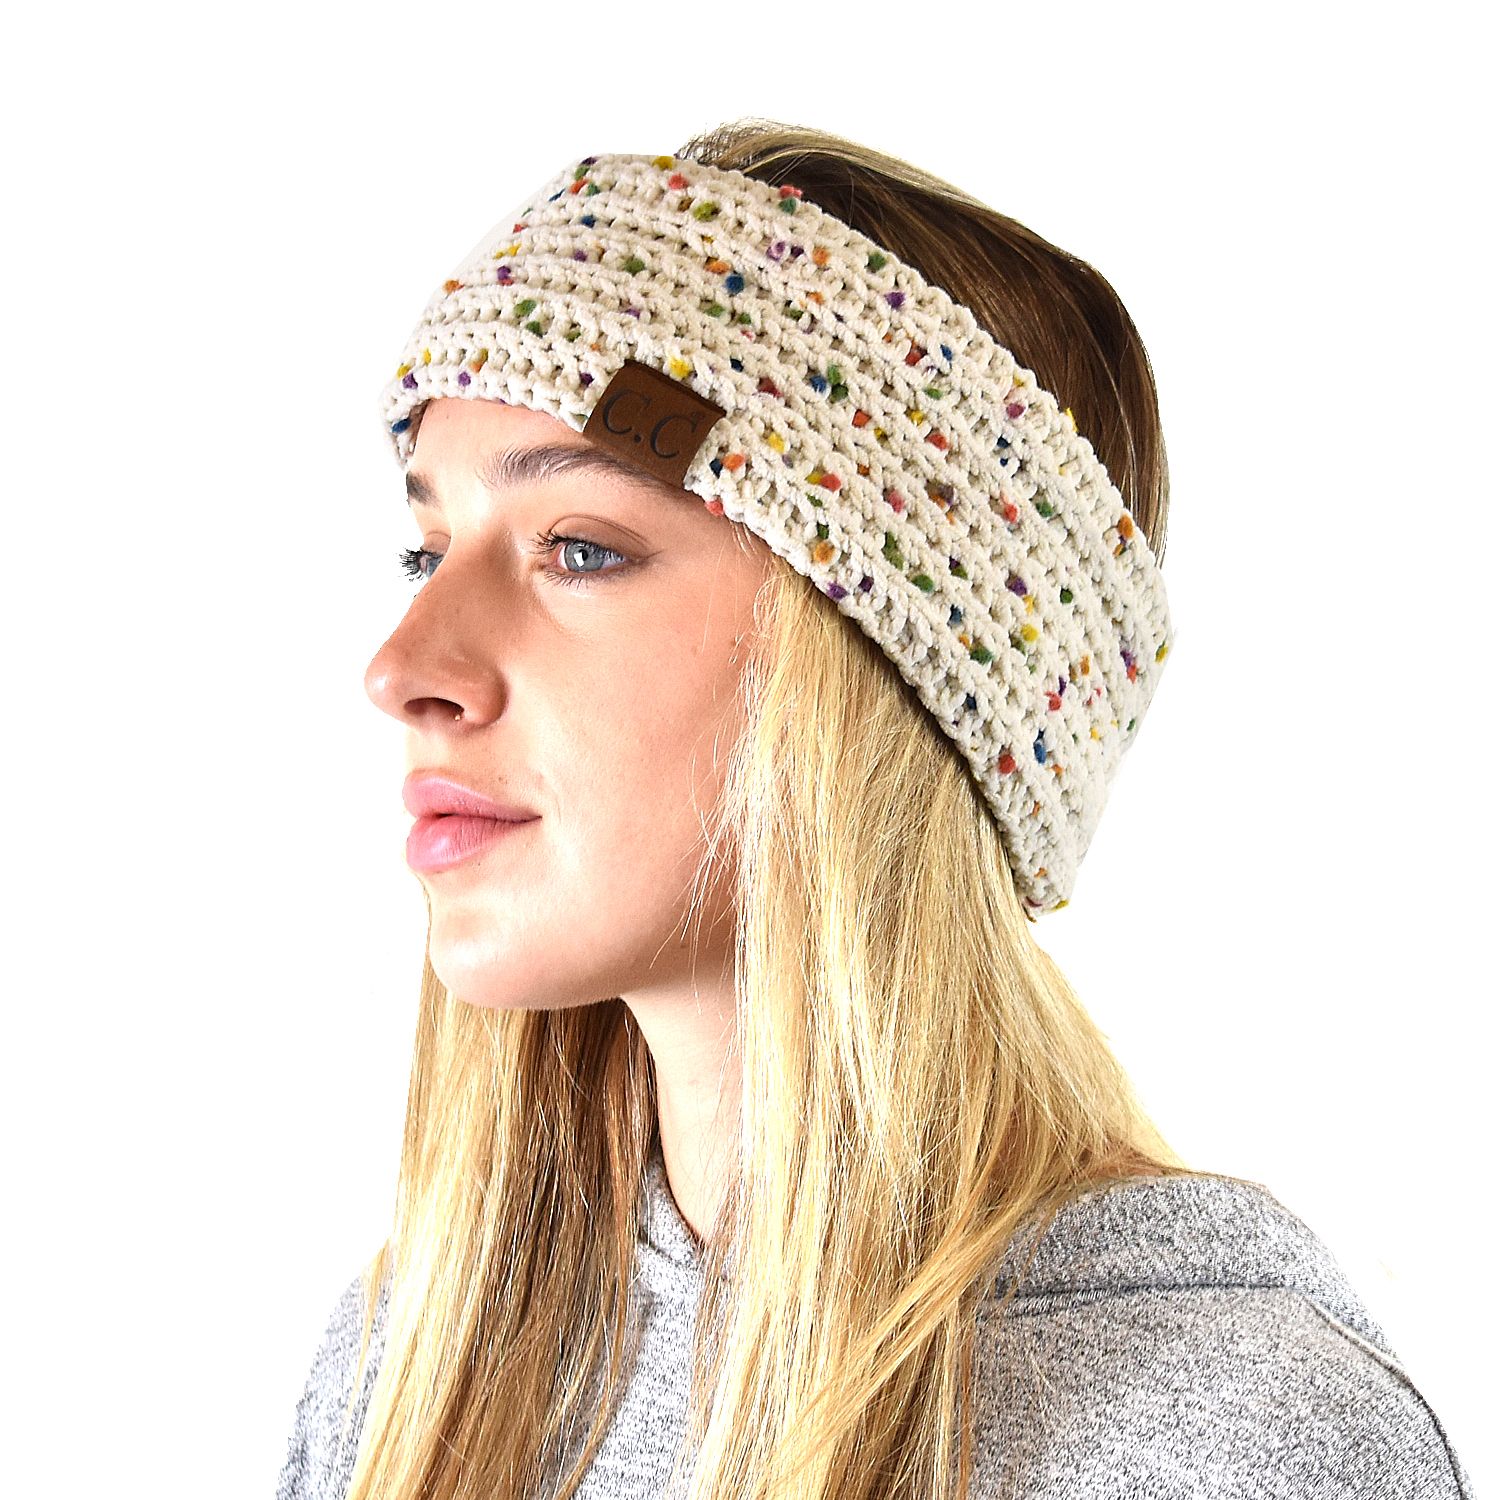 C.C Soft Stretch Winter Warm Cable Knit Fuzzy Lined Ear Warmer Headband, Chenille Confetti Oatmeal - image 1 of 4